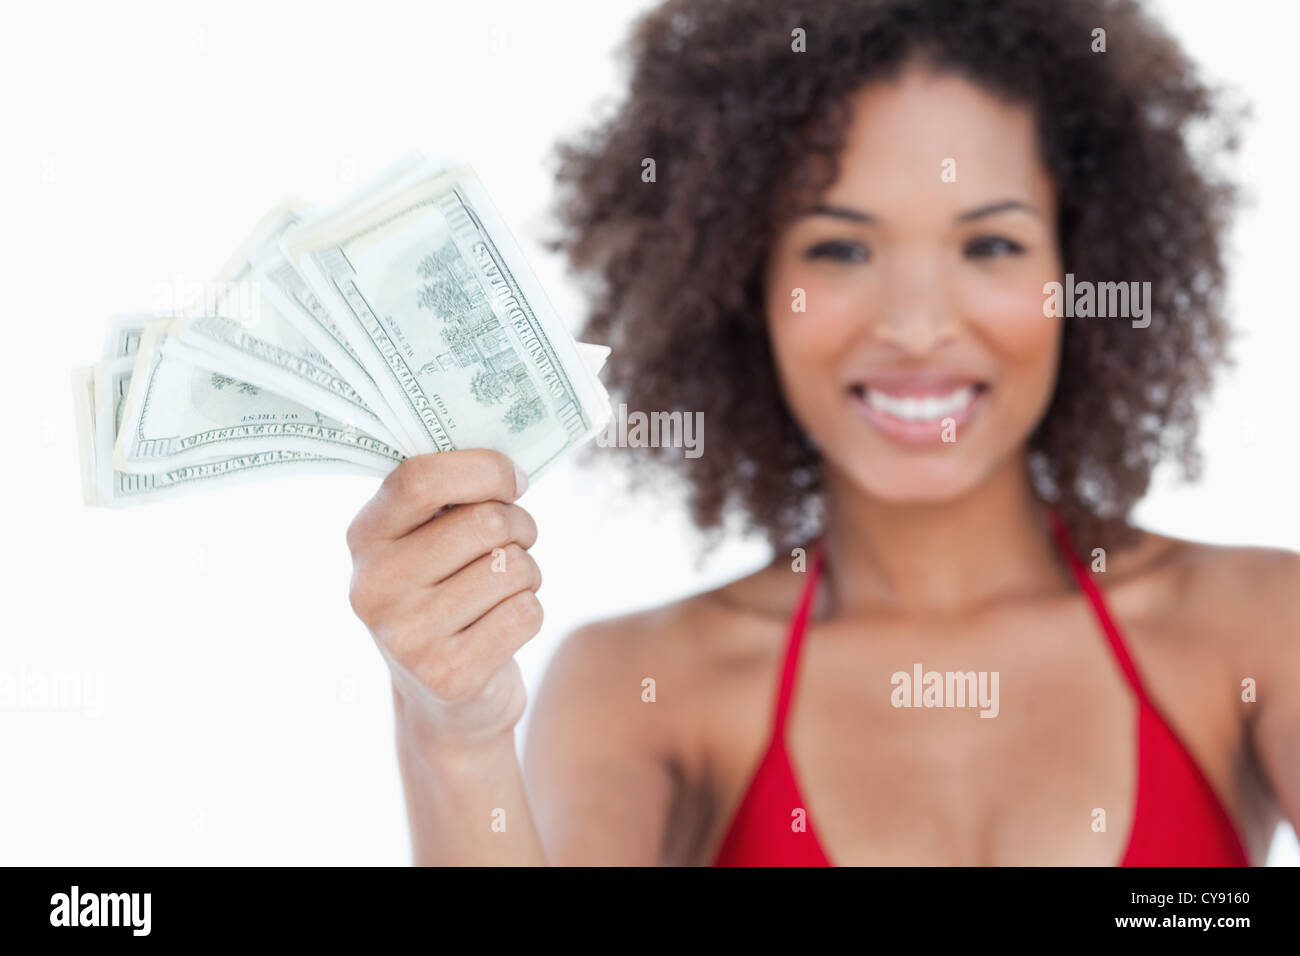 Bank notes being held by an attractive woman Stock Photo